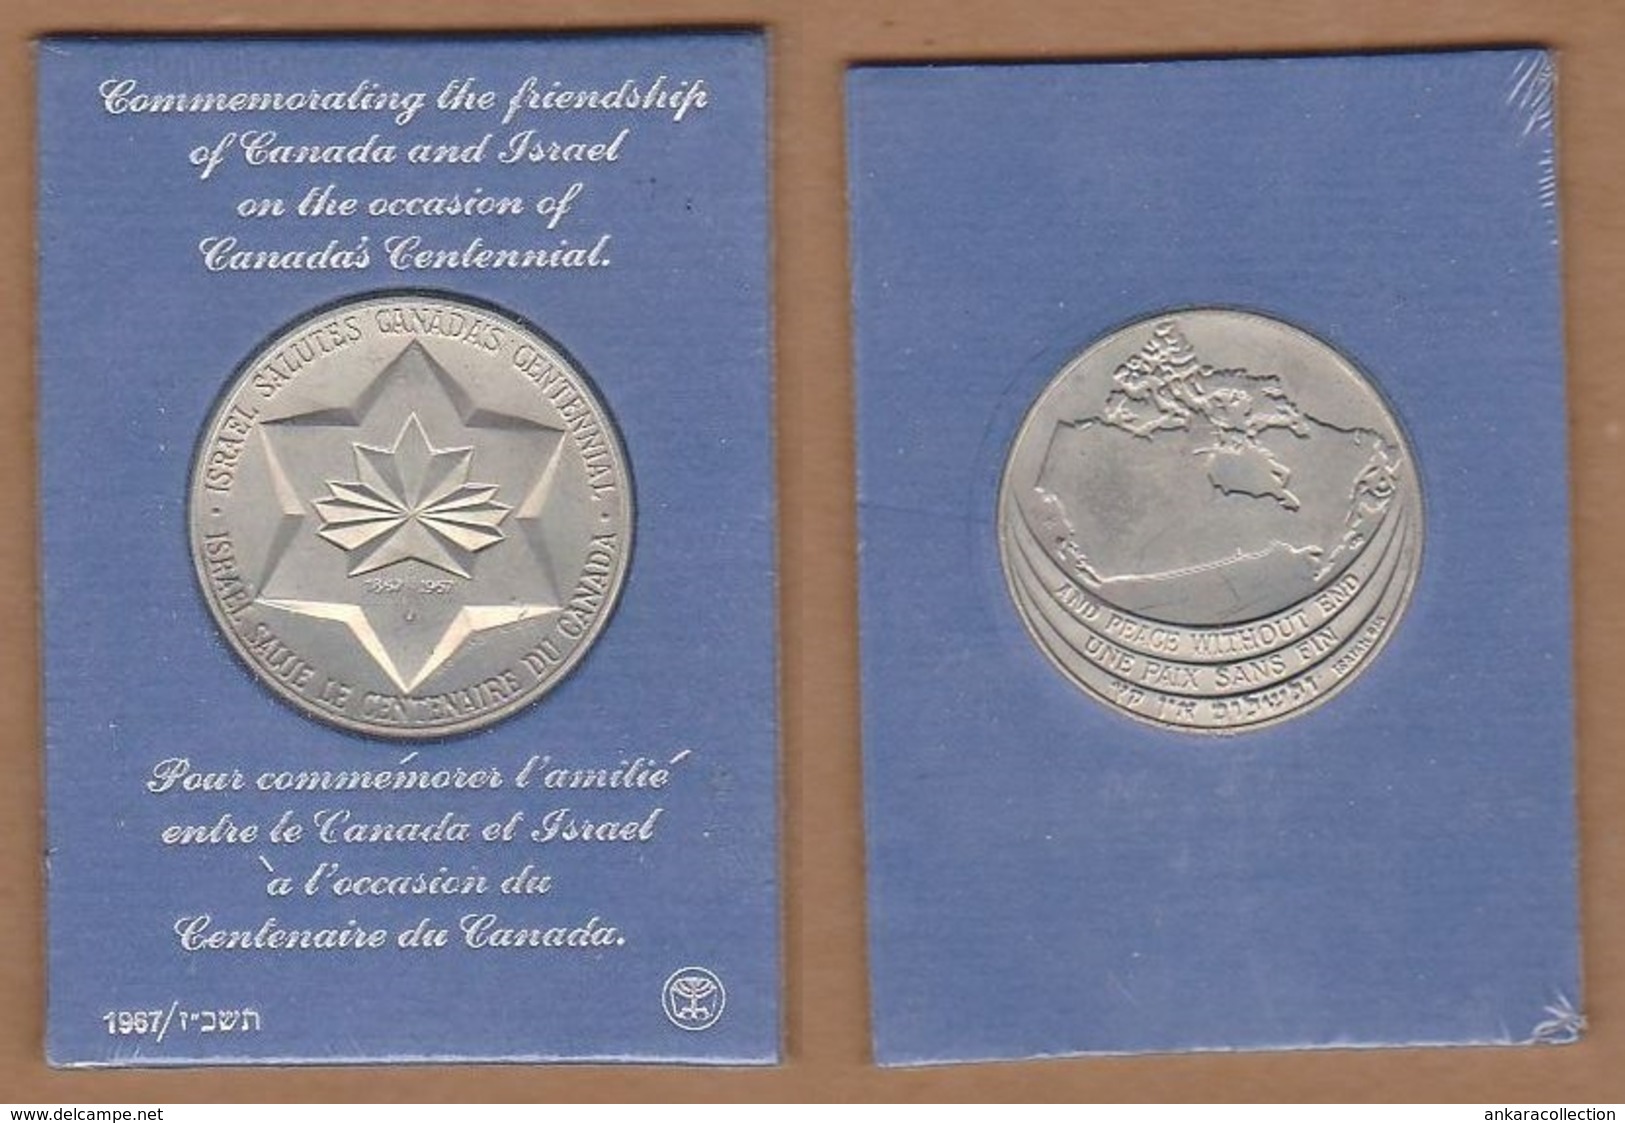 AC - COMMEMORATING THE FRIENDSHIP OF CANADA AND ISRAEL ON THE OCCASION OF CANADA'S CENTENNIAL 1967 MEDAL MEDALLION - Monarquía / Nobleza